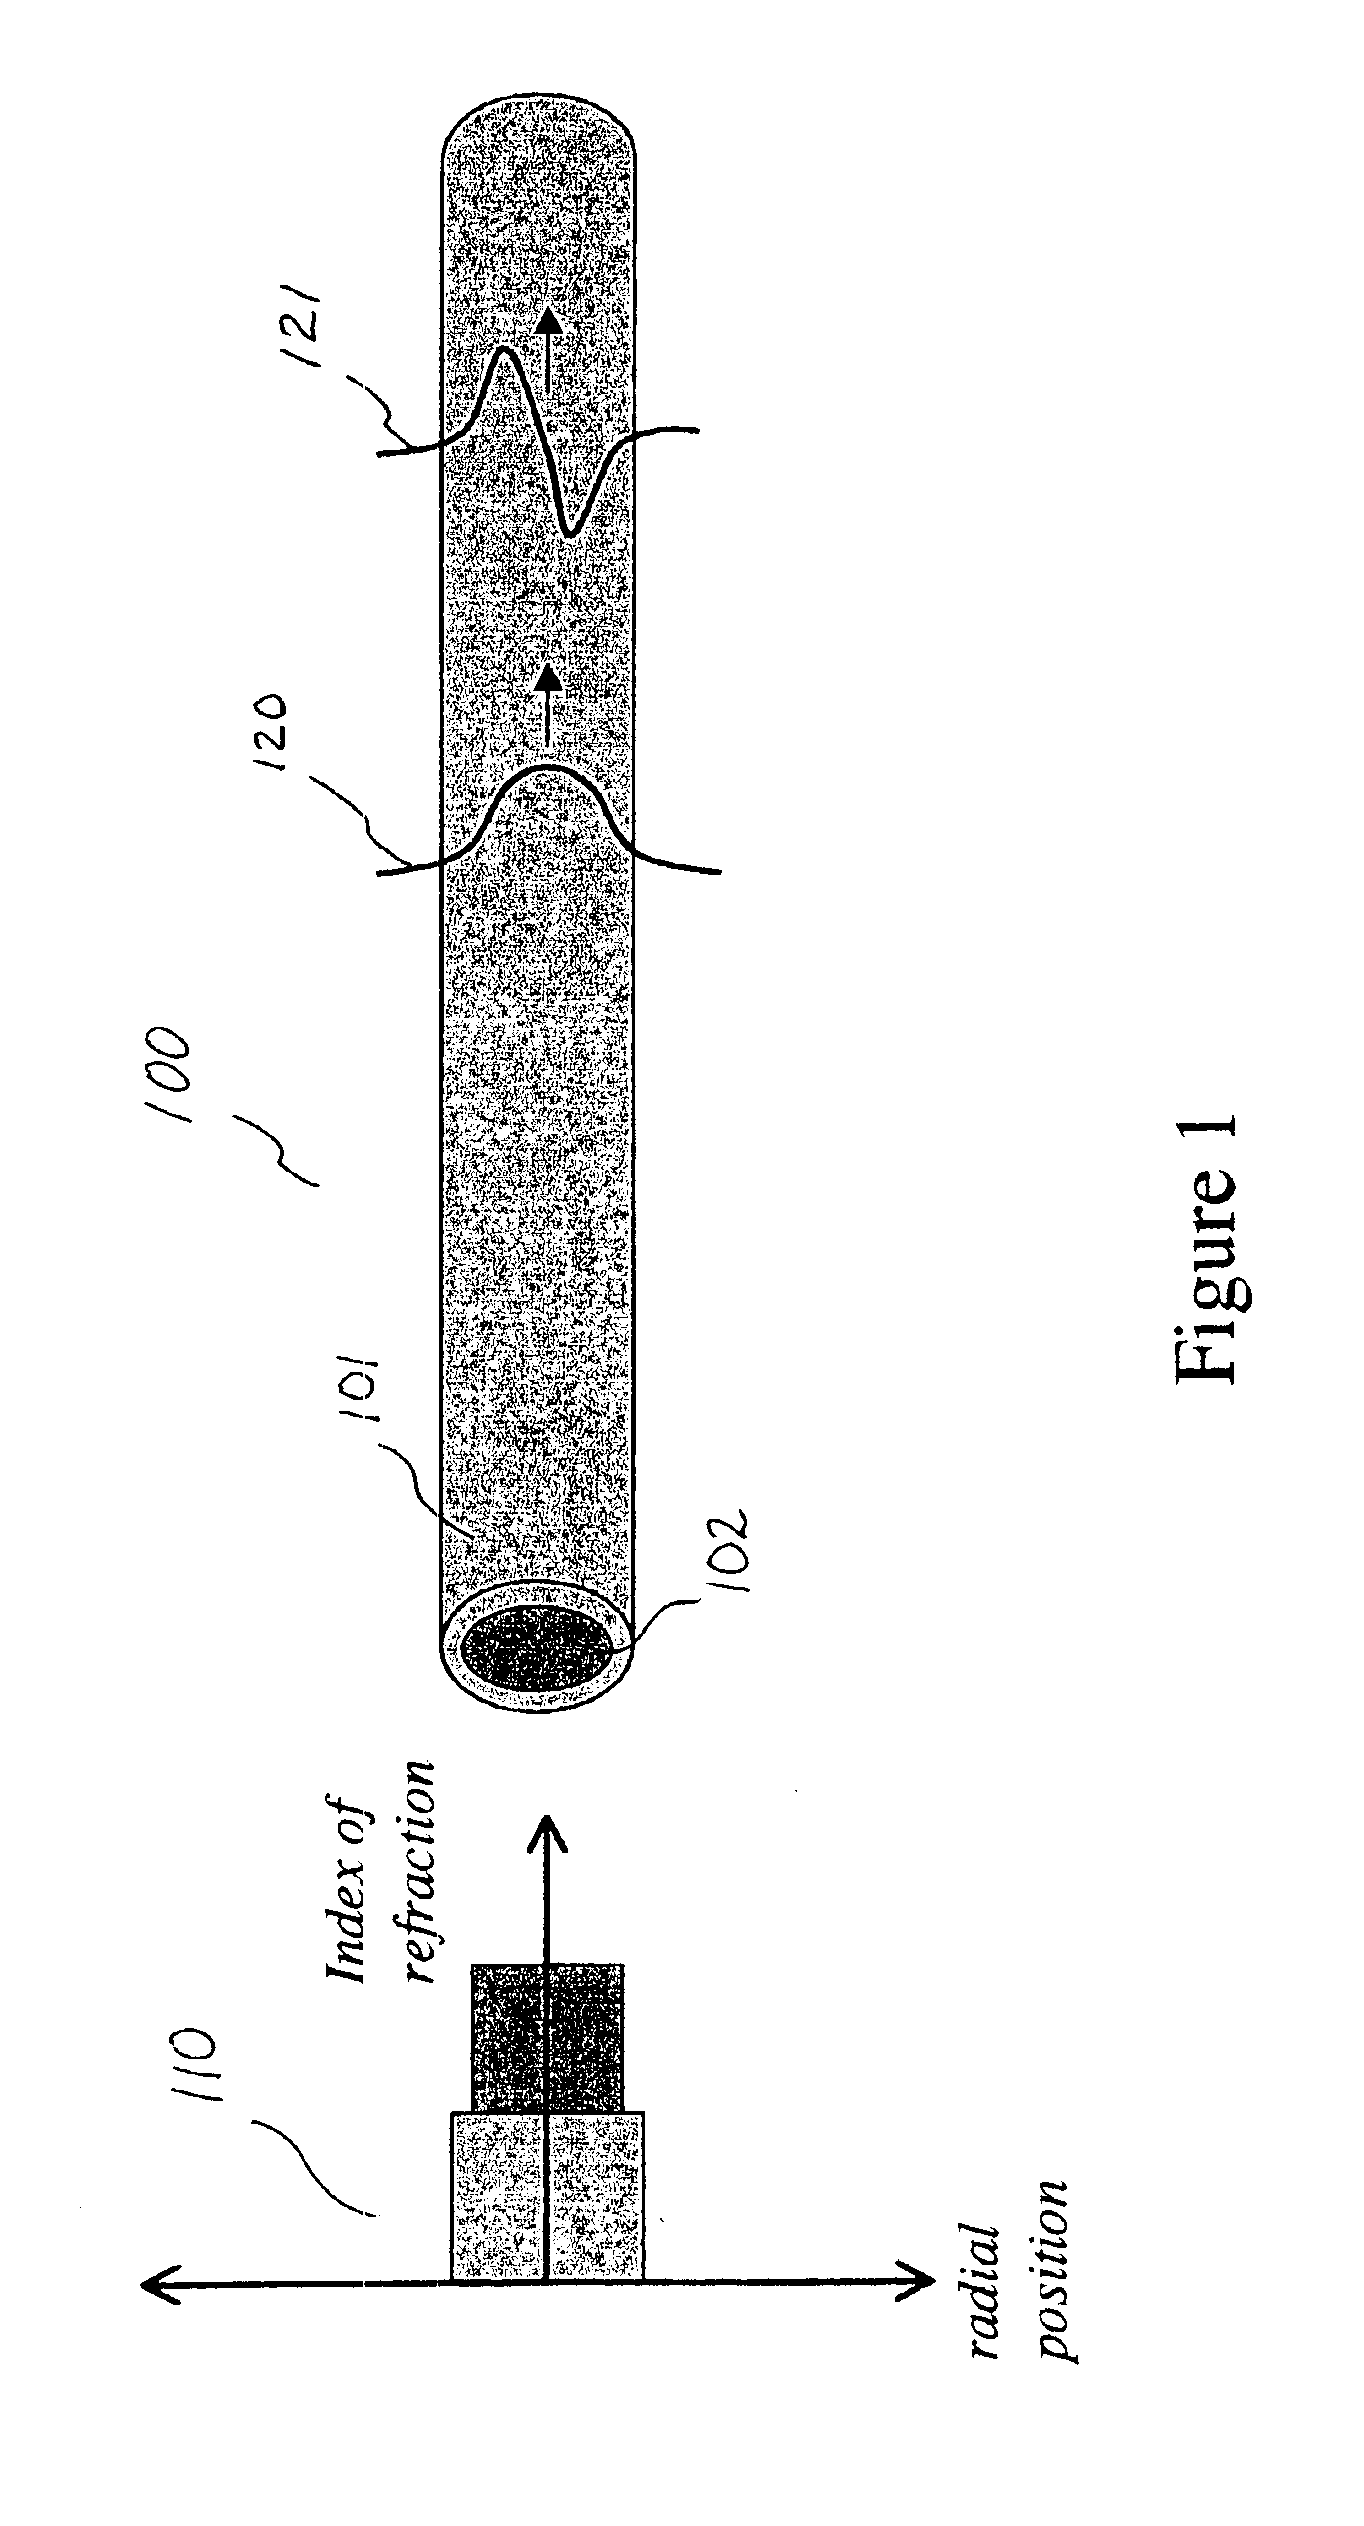 Apparatus for beam homogenization and speckle reduction